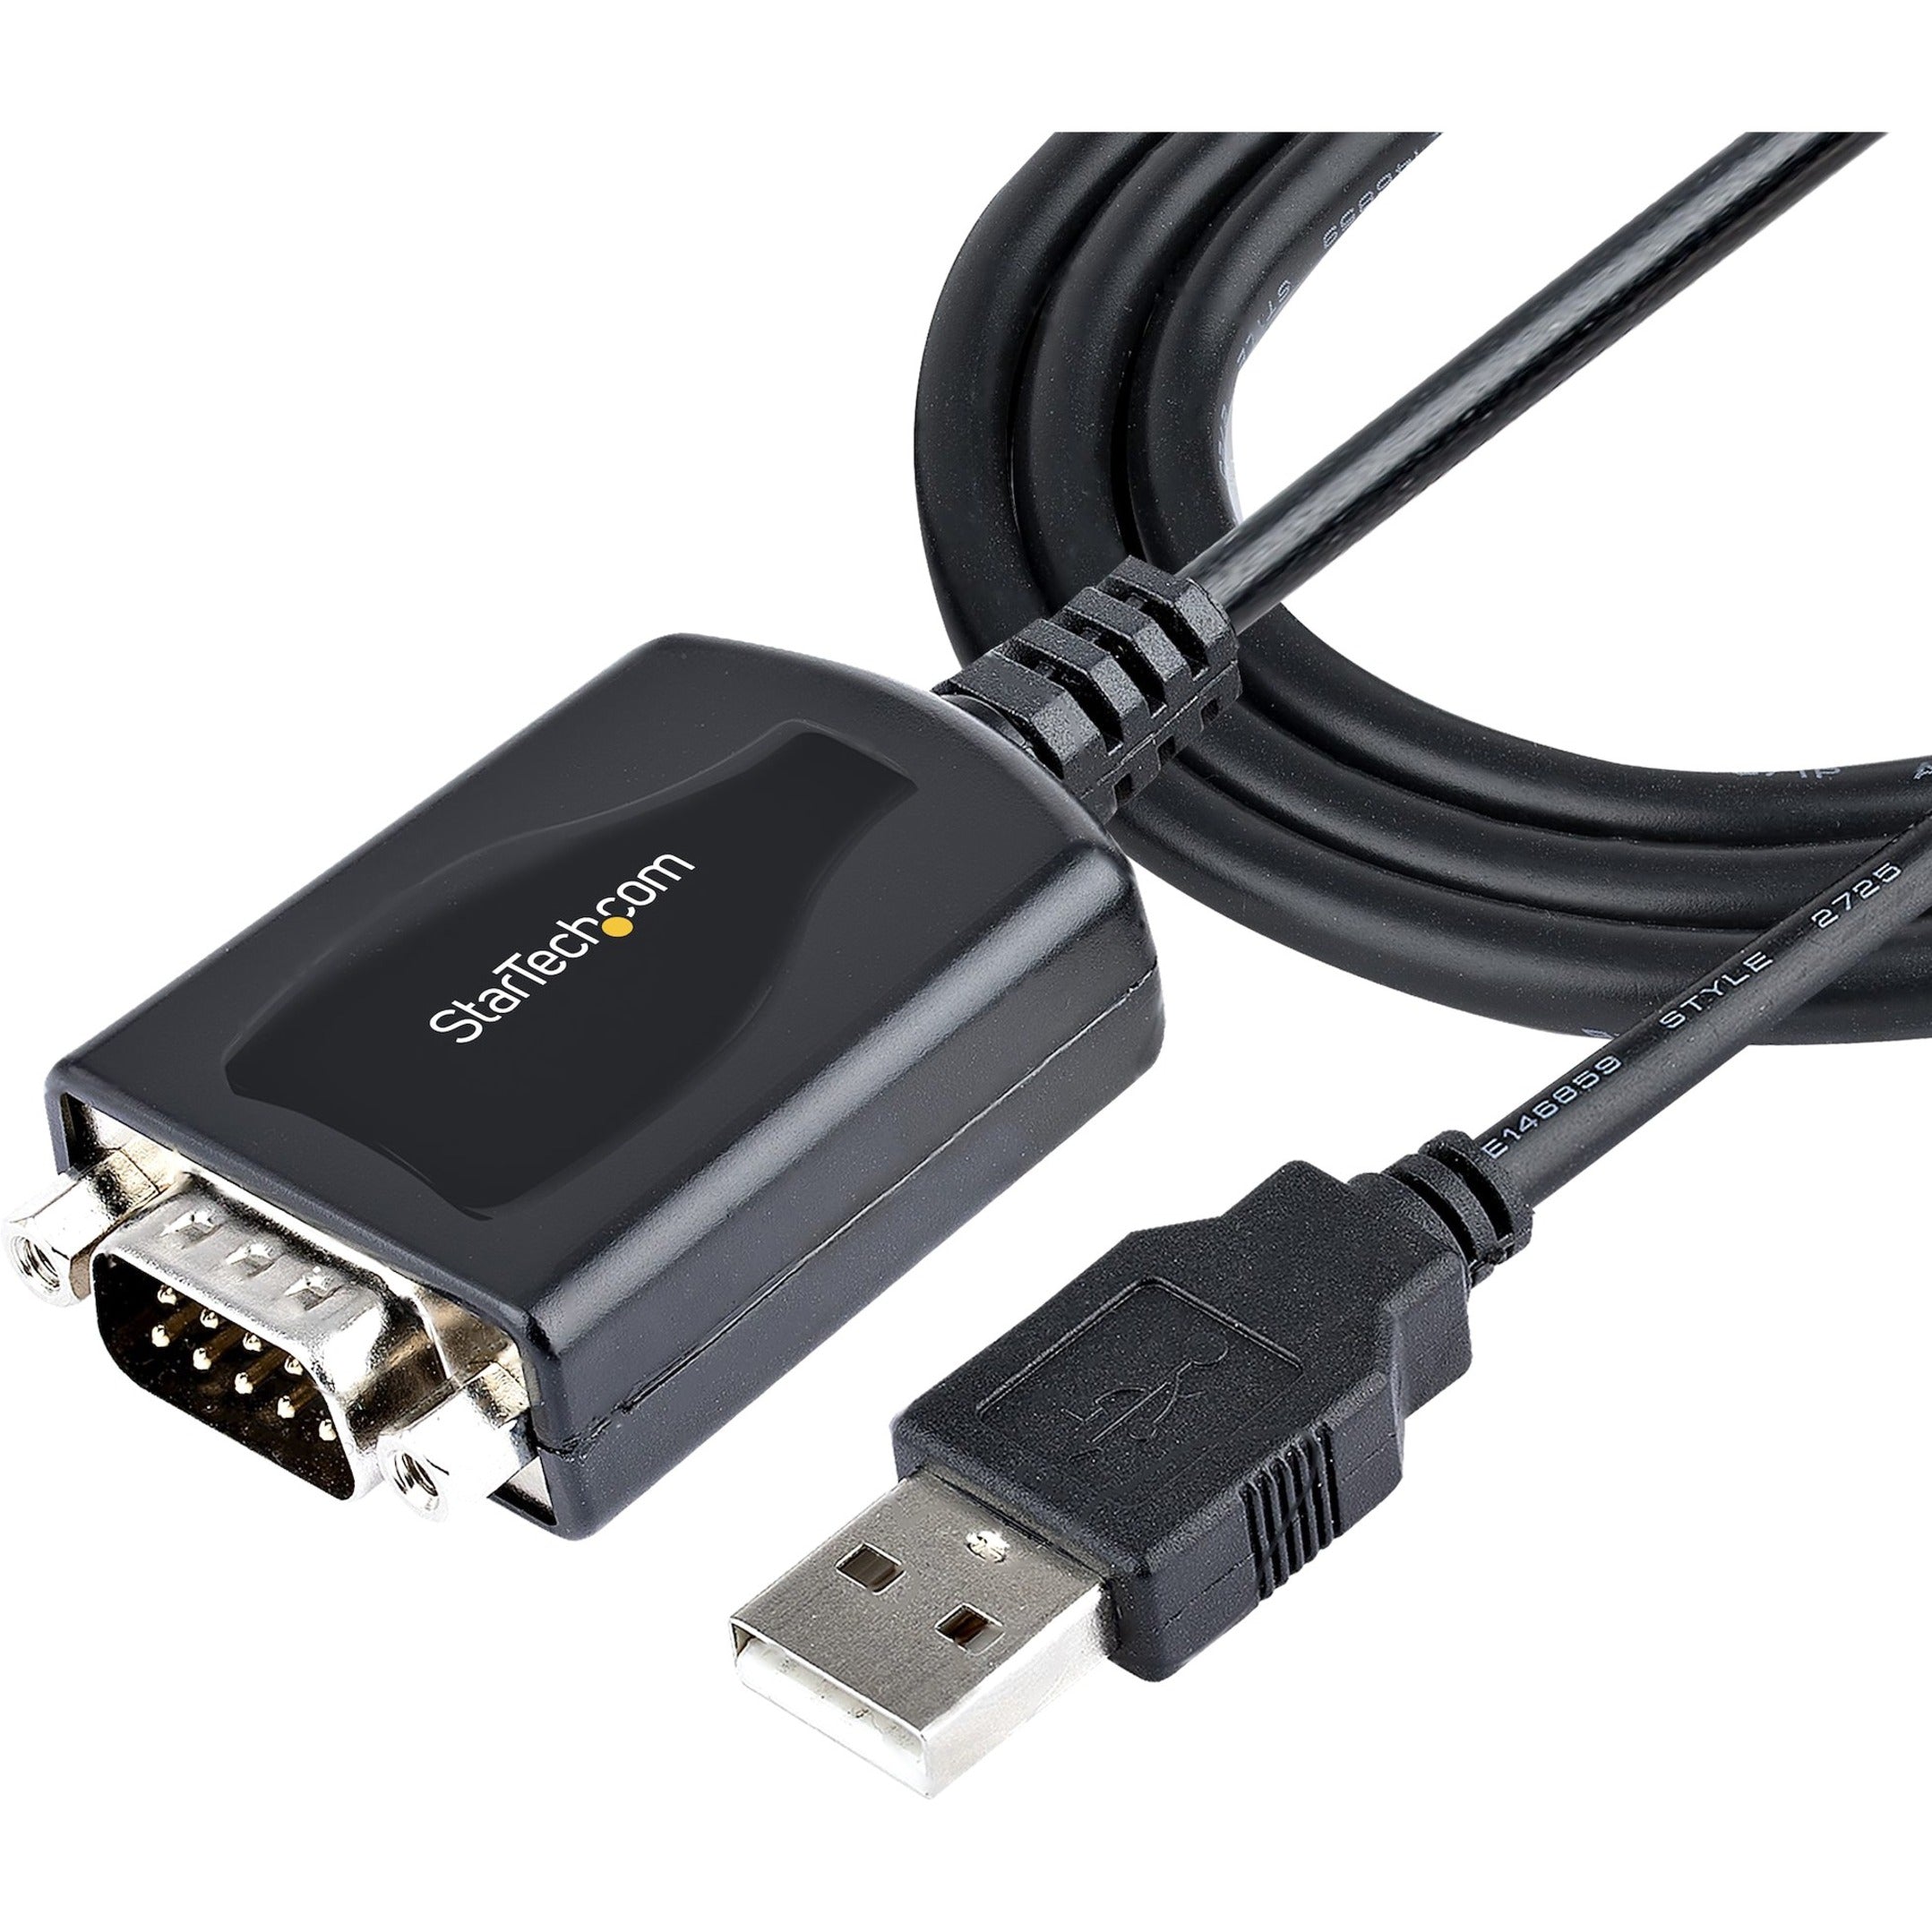 StarTech.com 1P3FPC-USB-SERIAL USB to Serial Adapter, 3.28 ft Cable Length, Screw Lock